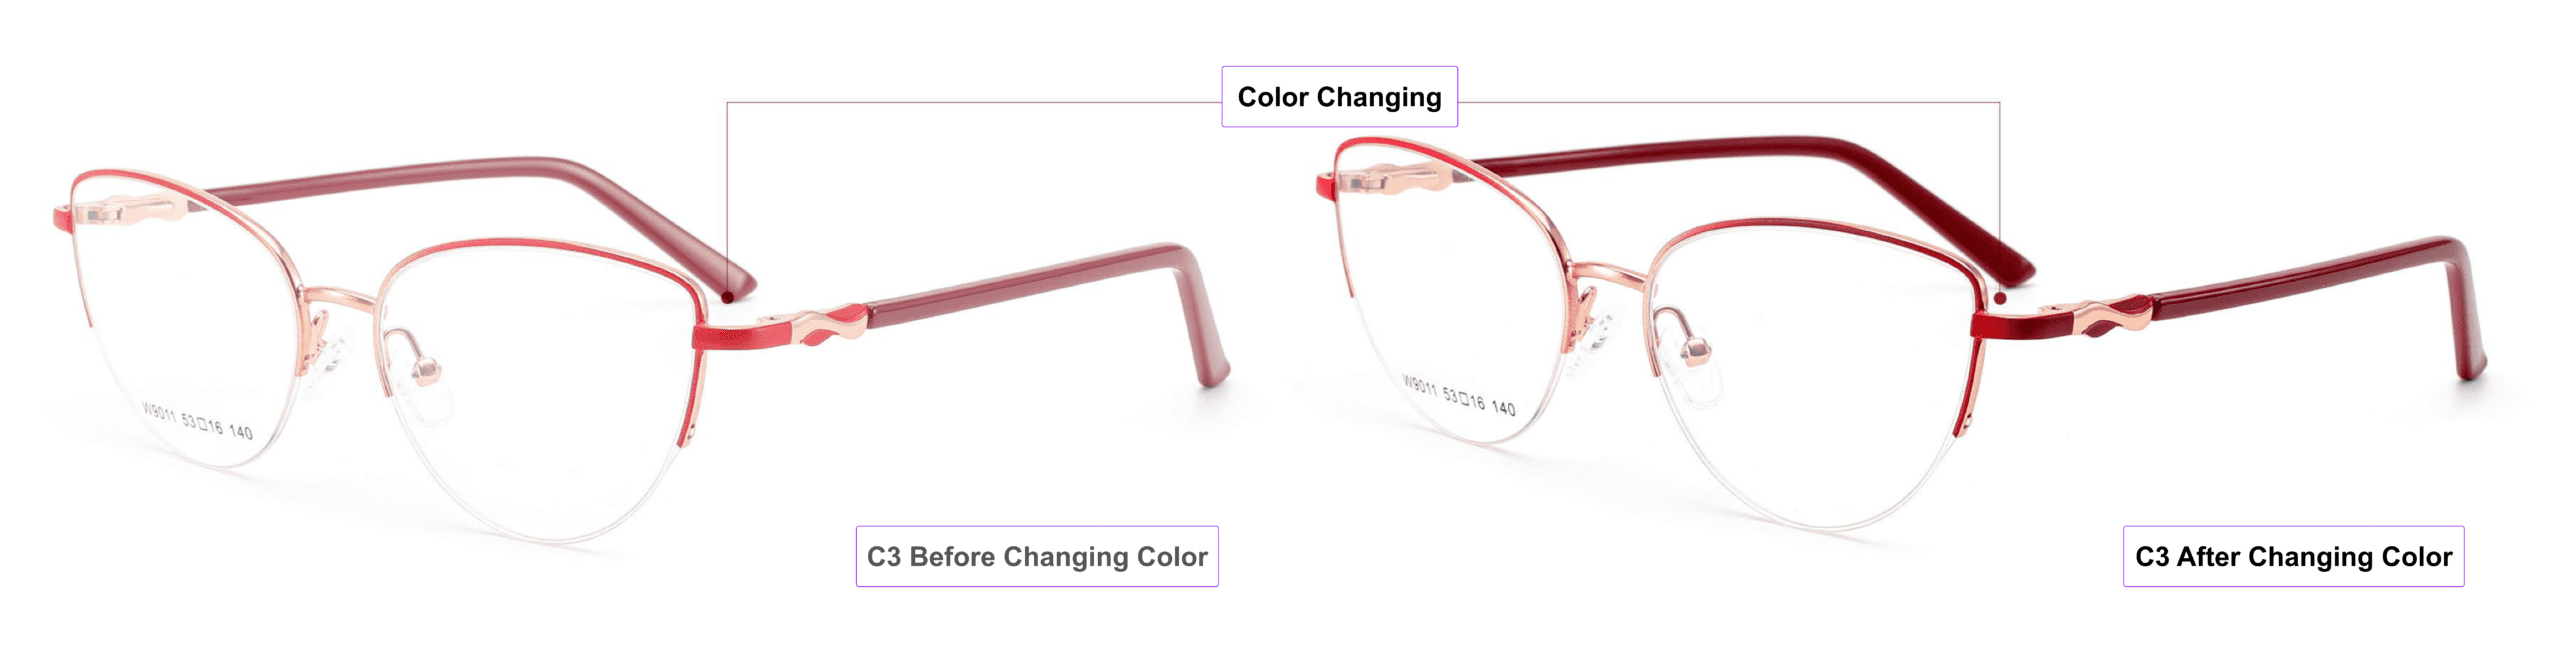 color changing glasses frames, China glasses wholesaler, glasses accessories, process of color changing, pink gold, crimson, dark red